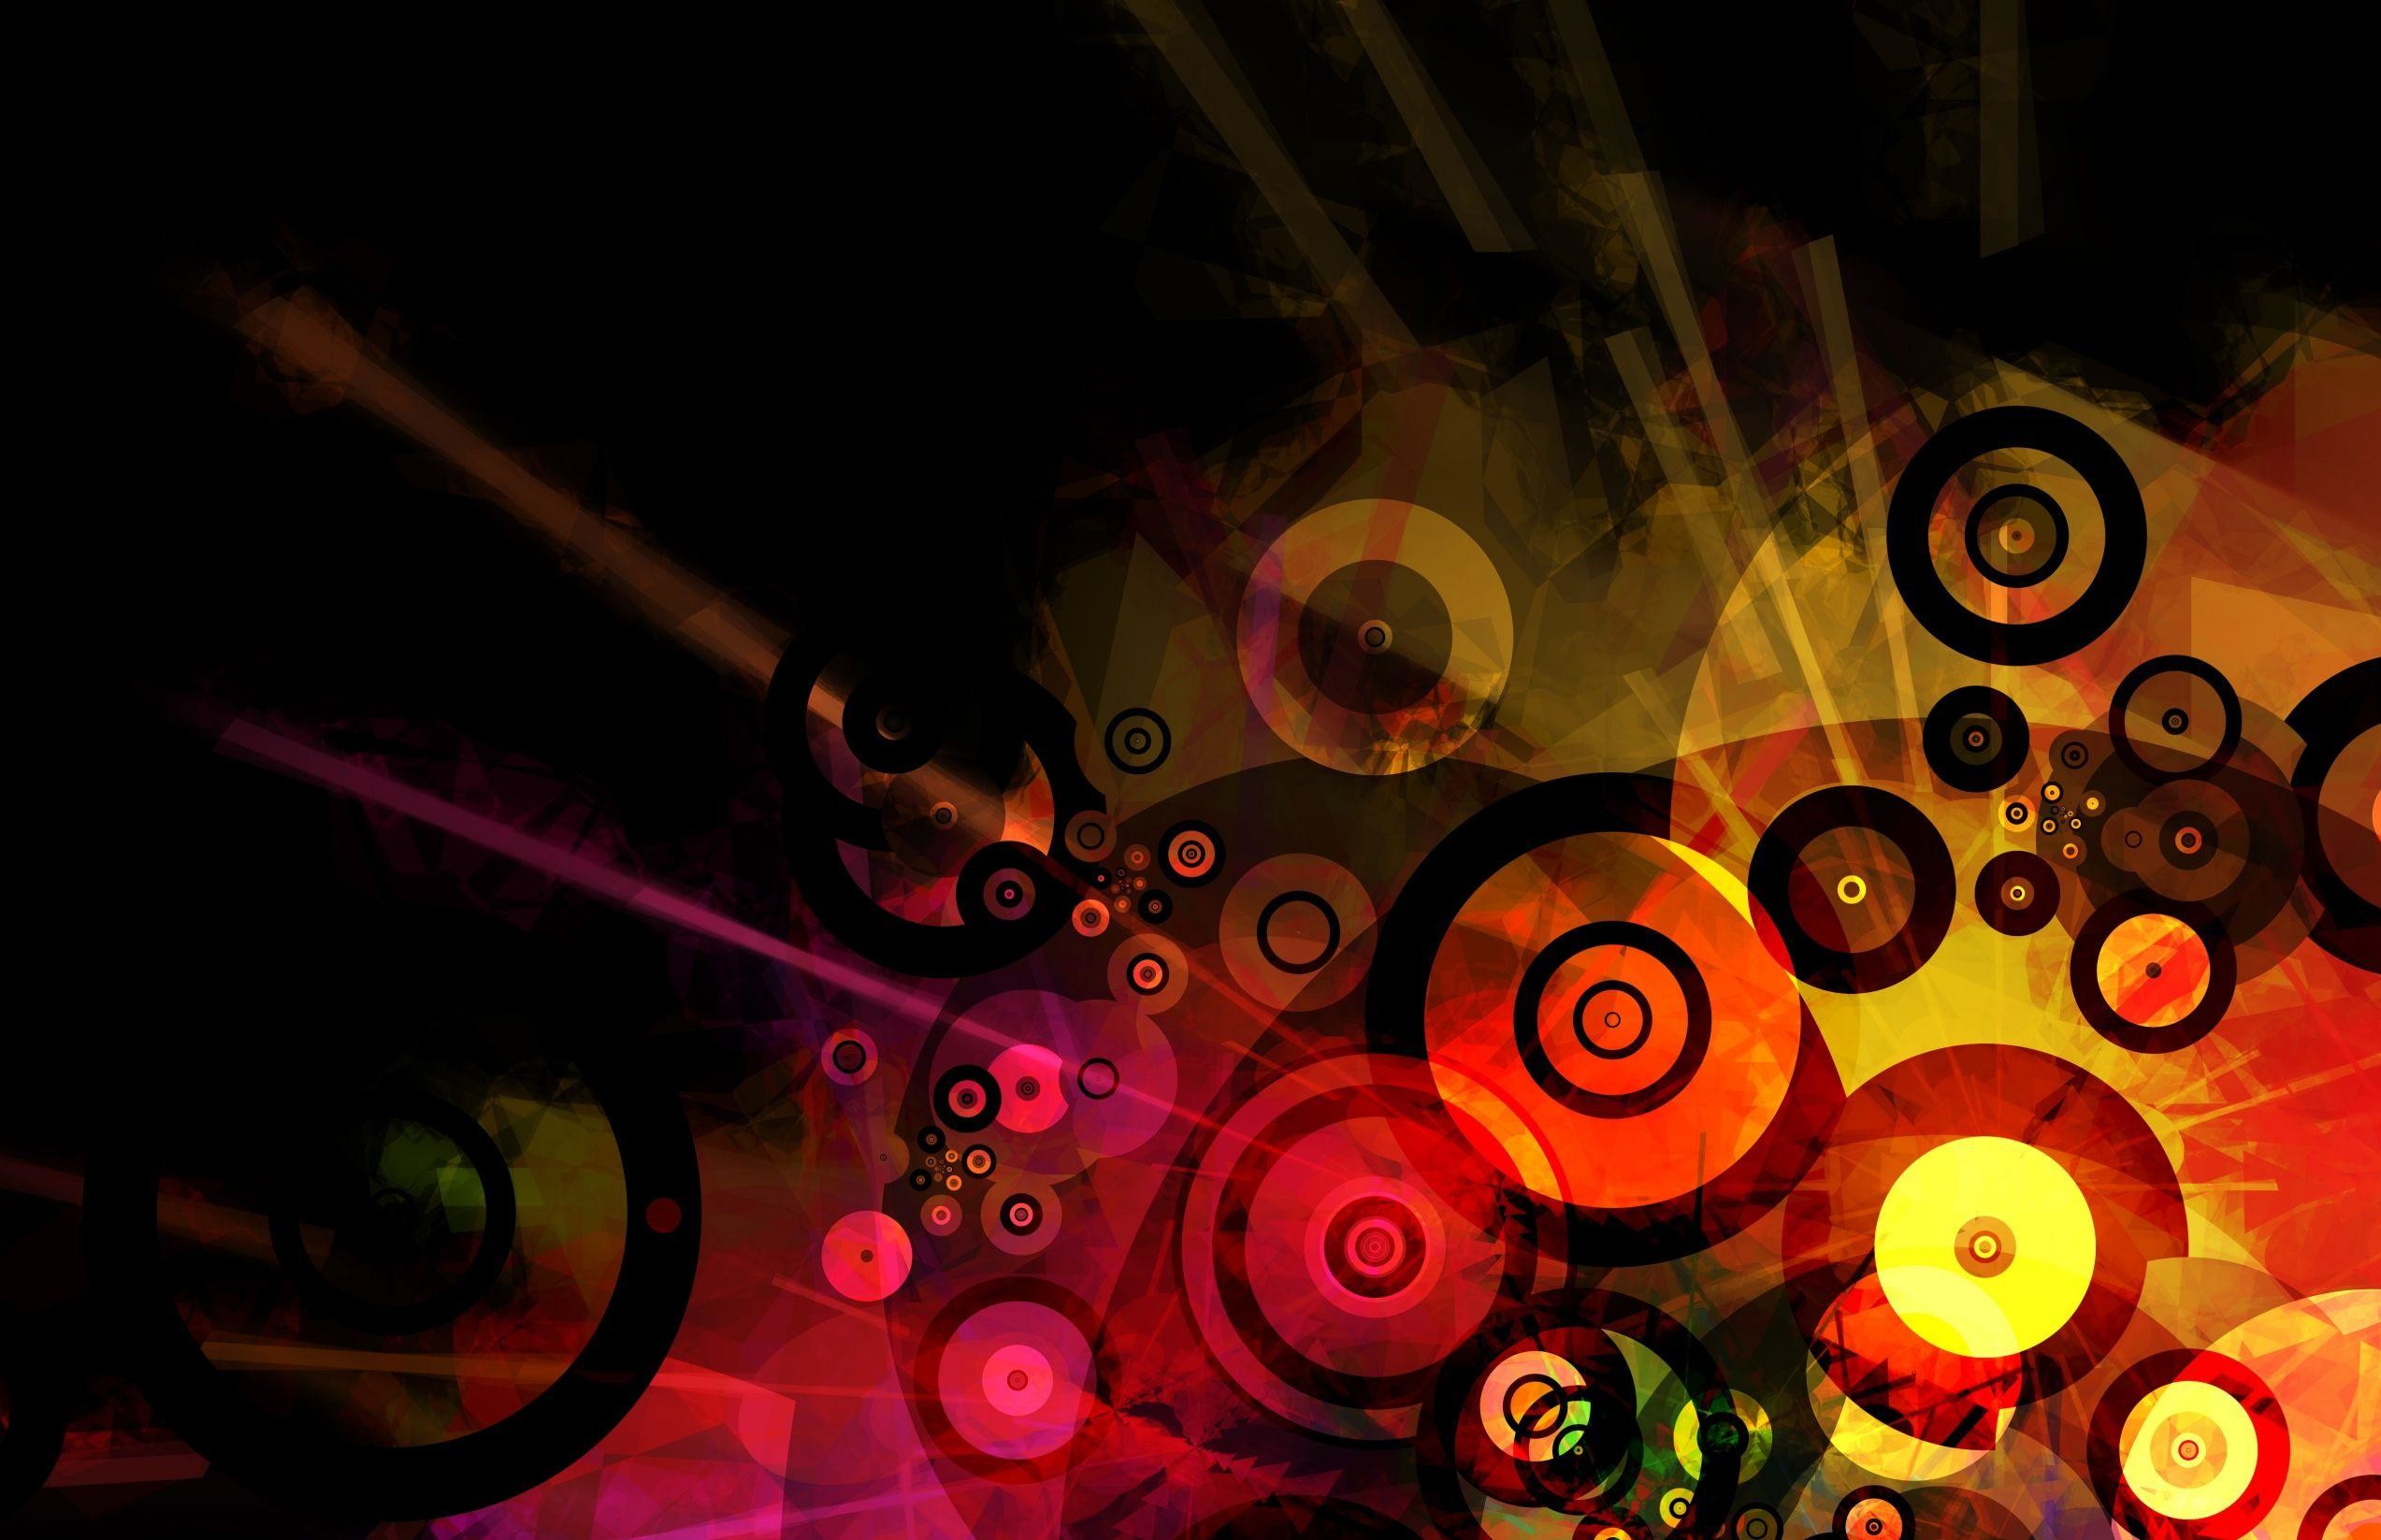 2546x1647 Hip Hop Backgrounds For Photoshop : SportIssue